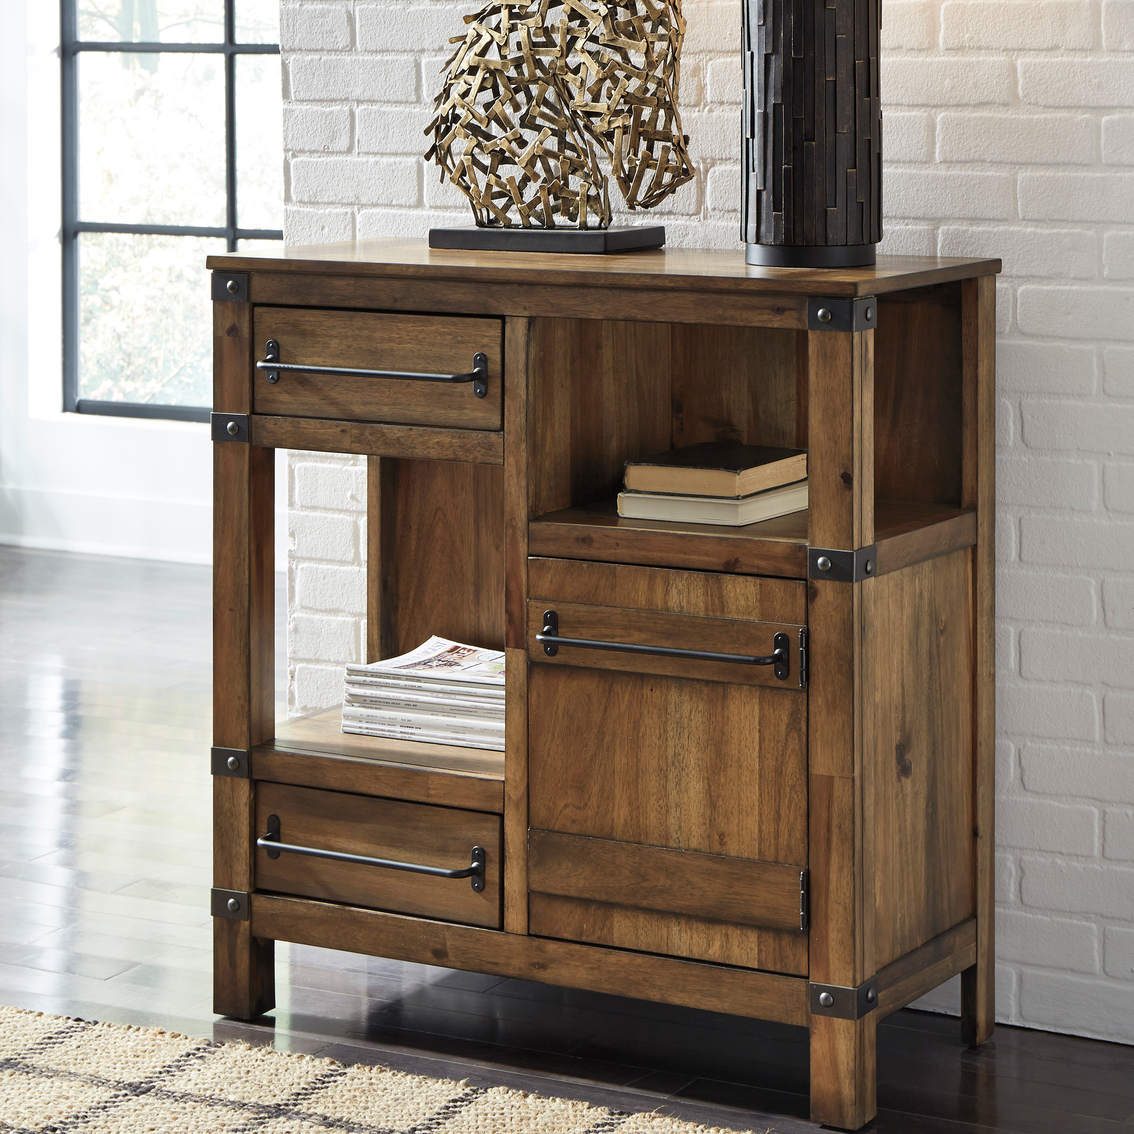 Signature Design by Ashley Roybeck Accent Cabinet - Image 4 of 5